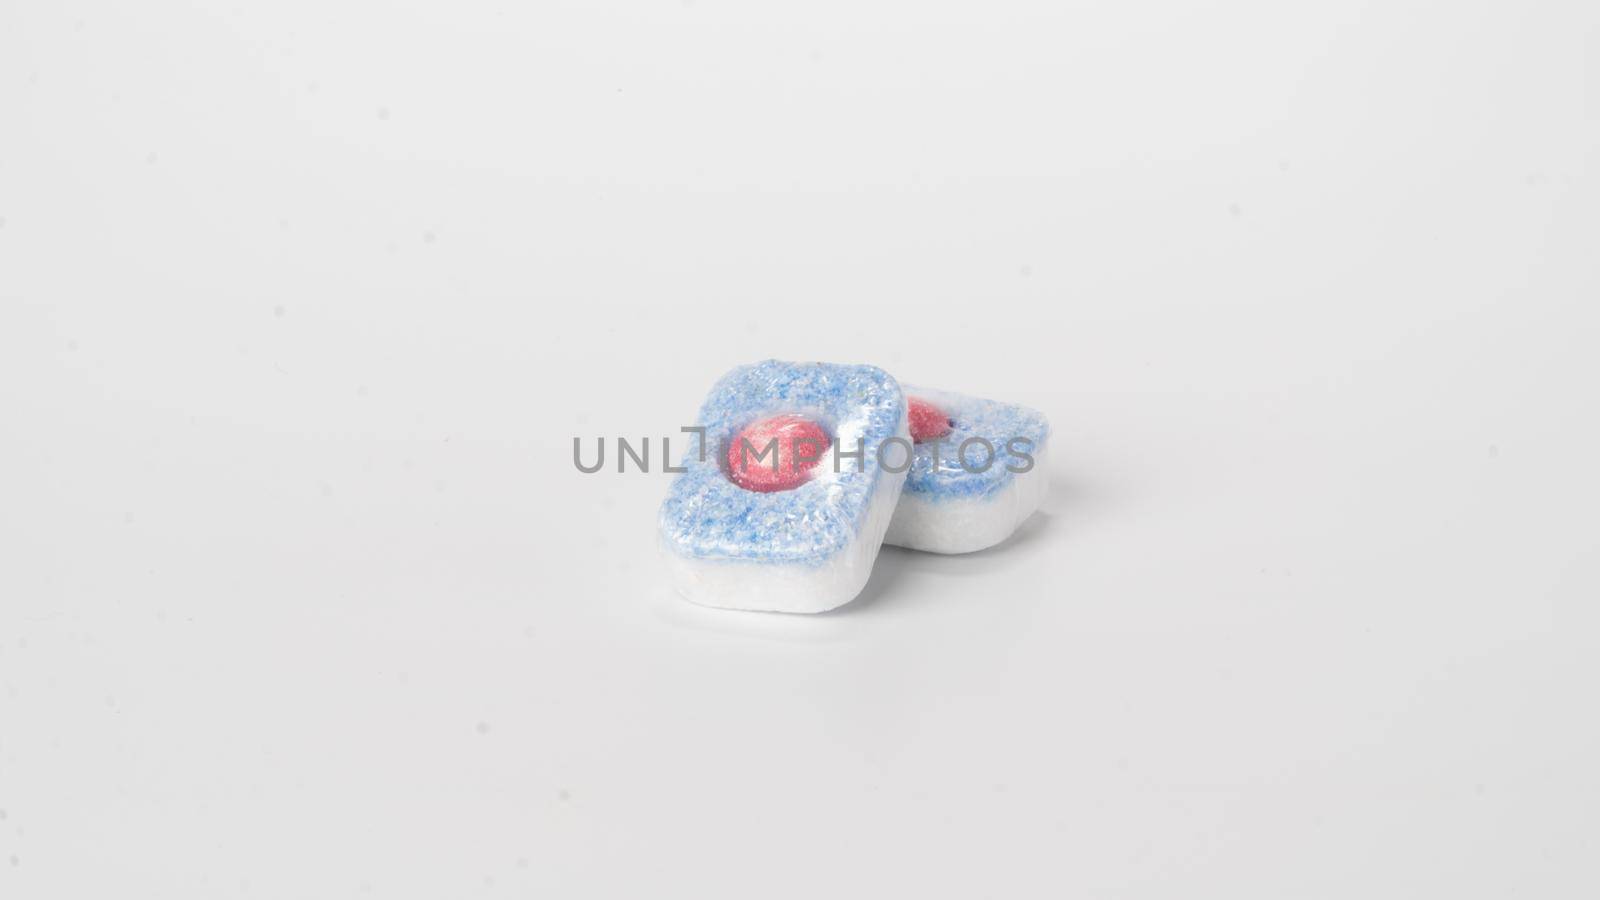 Detergent in dishwasher tablets on a white background. High quality photo